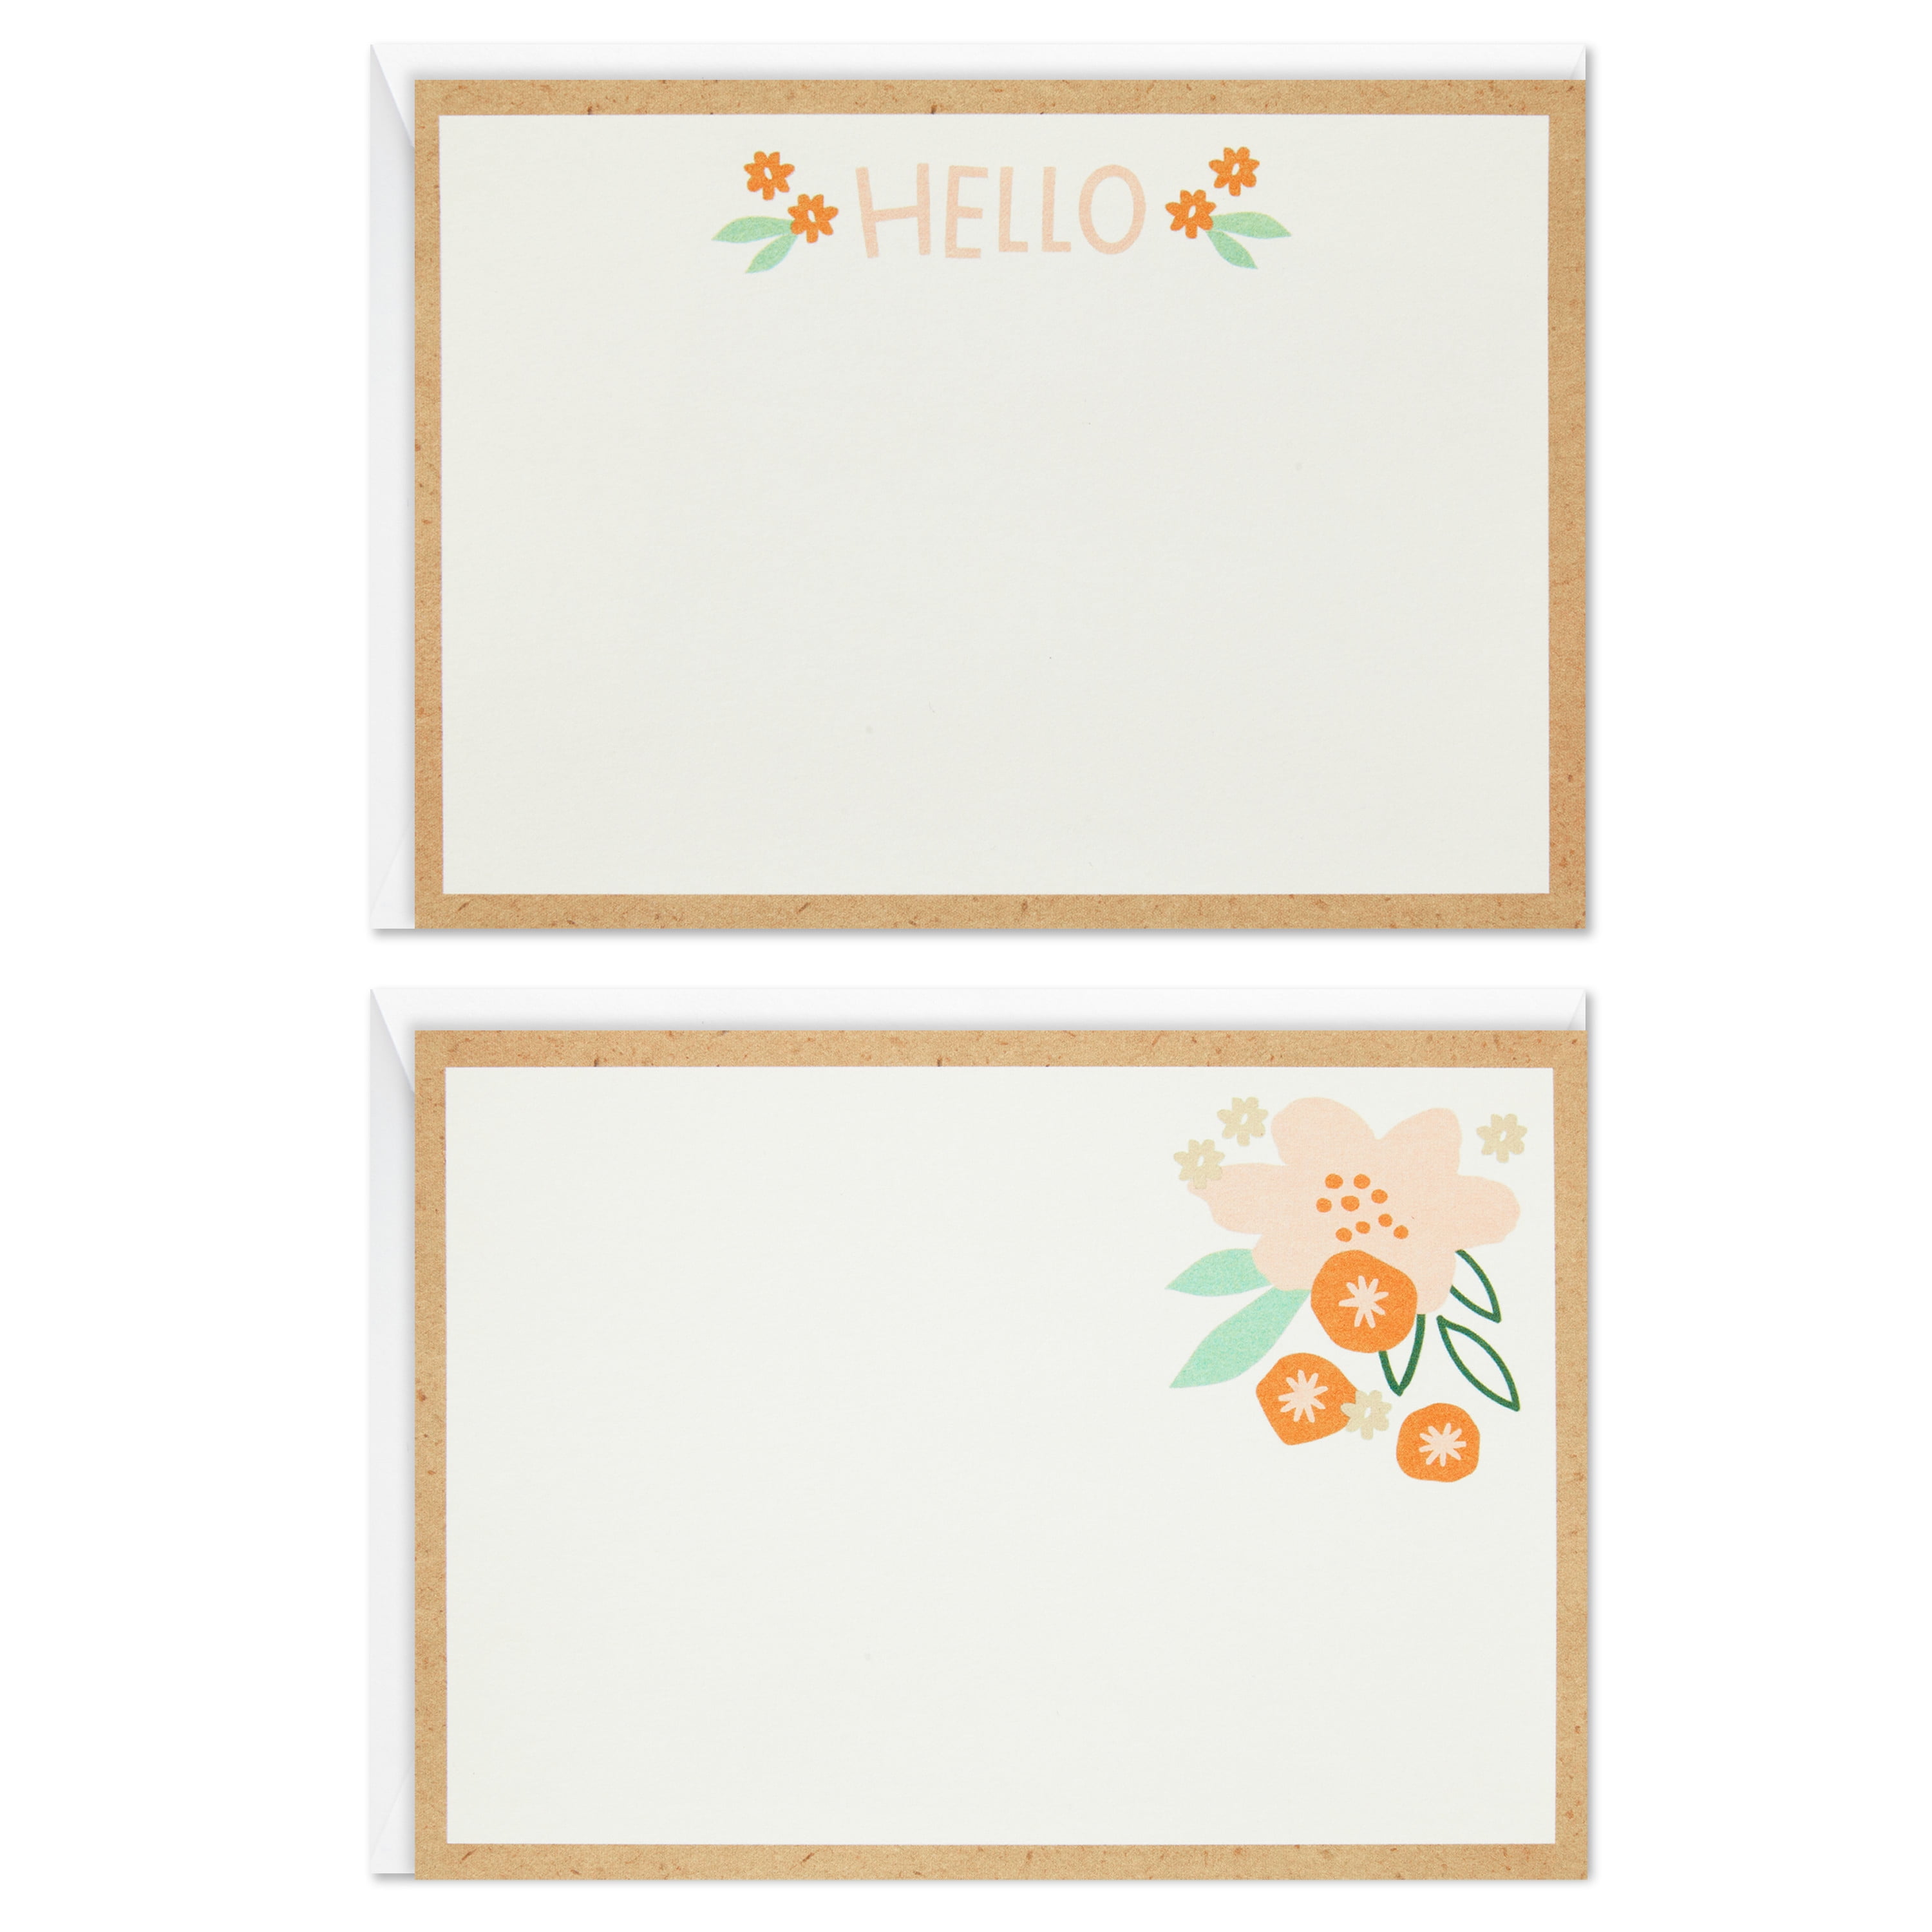 Paper Frenzy Peace Dove Blank Note Cards And Kraft Envelopes - 25 Pack :  Target